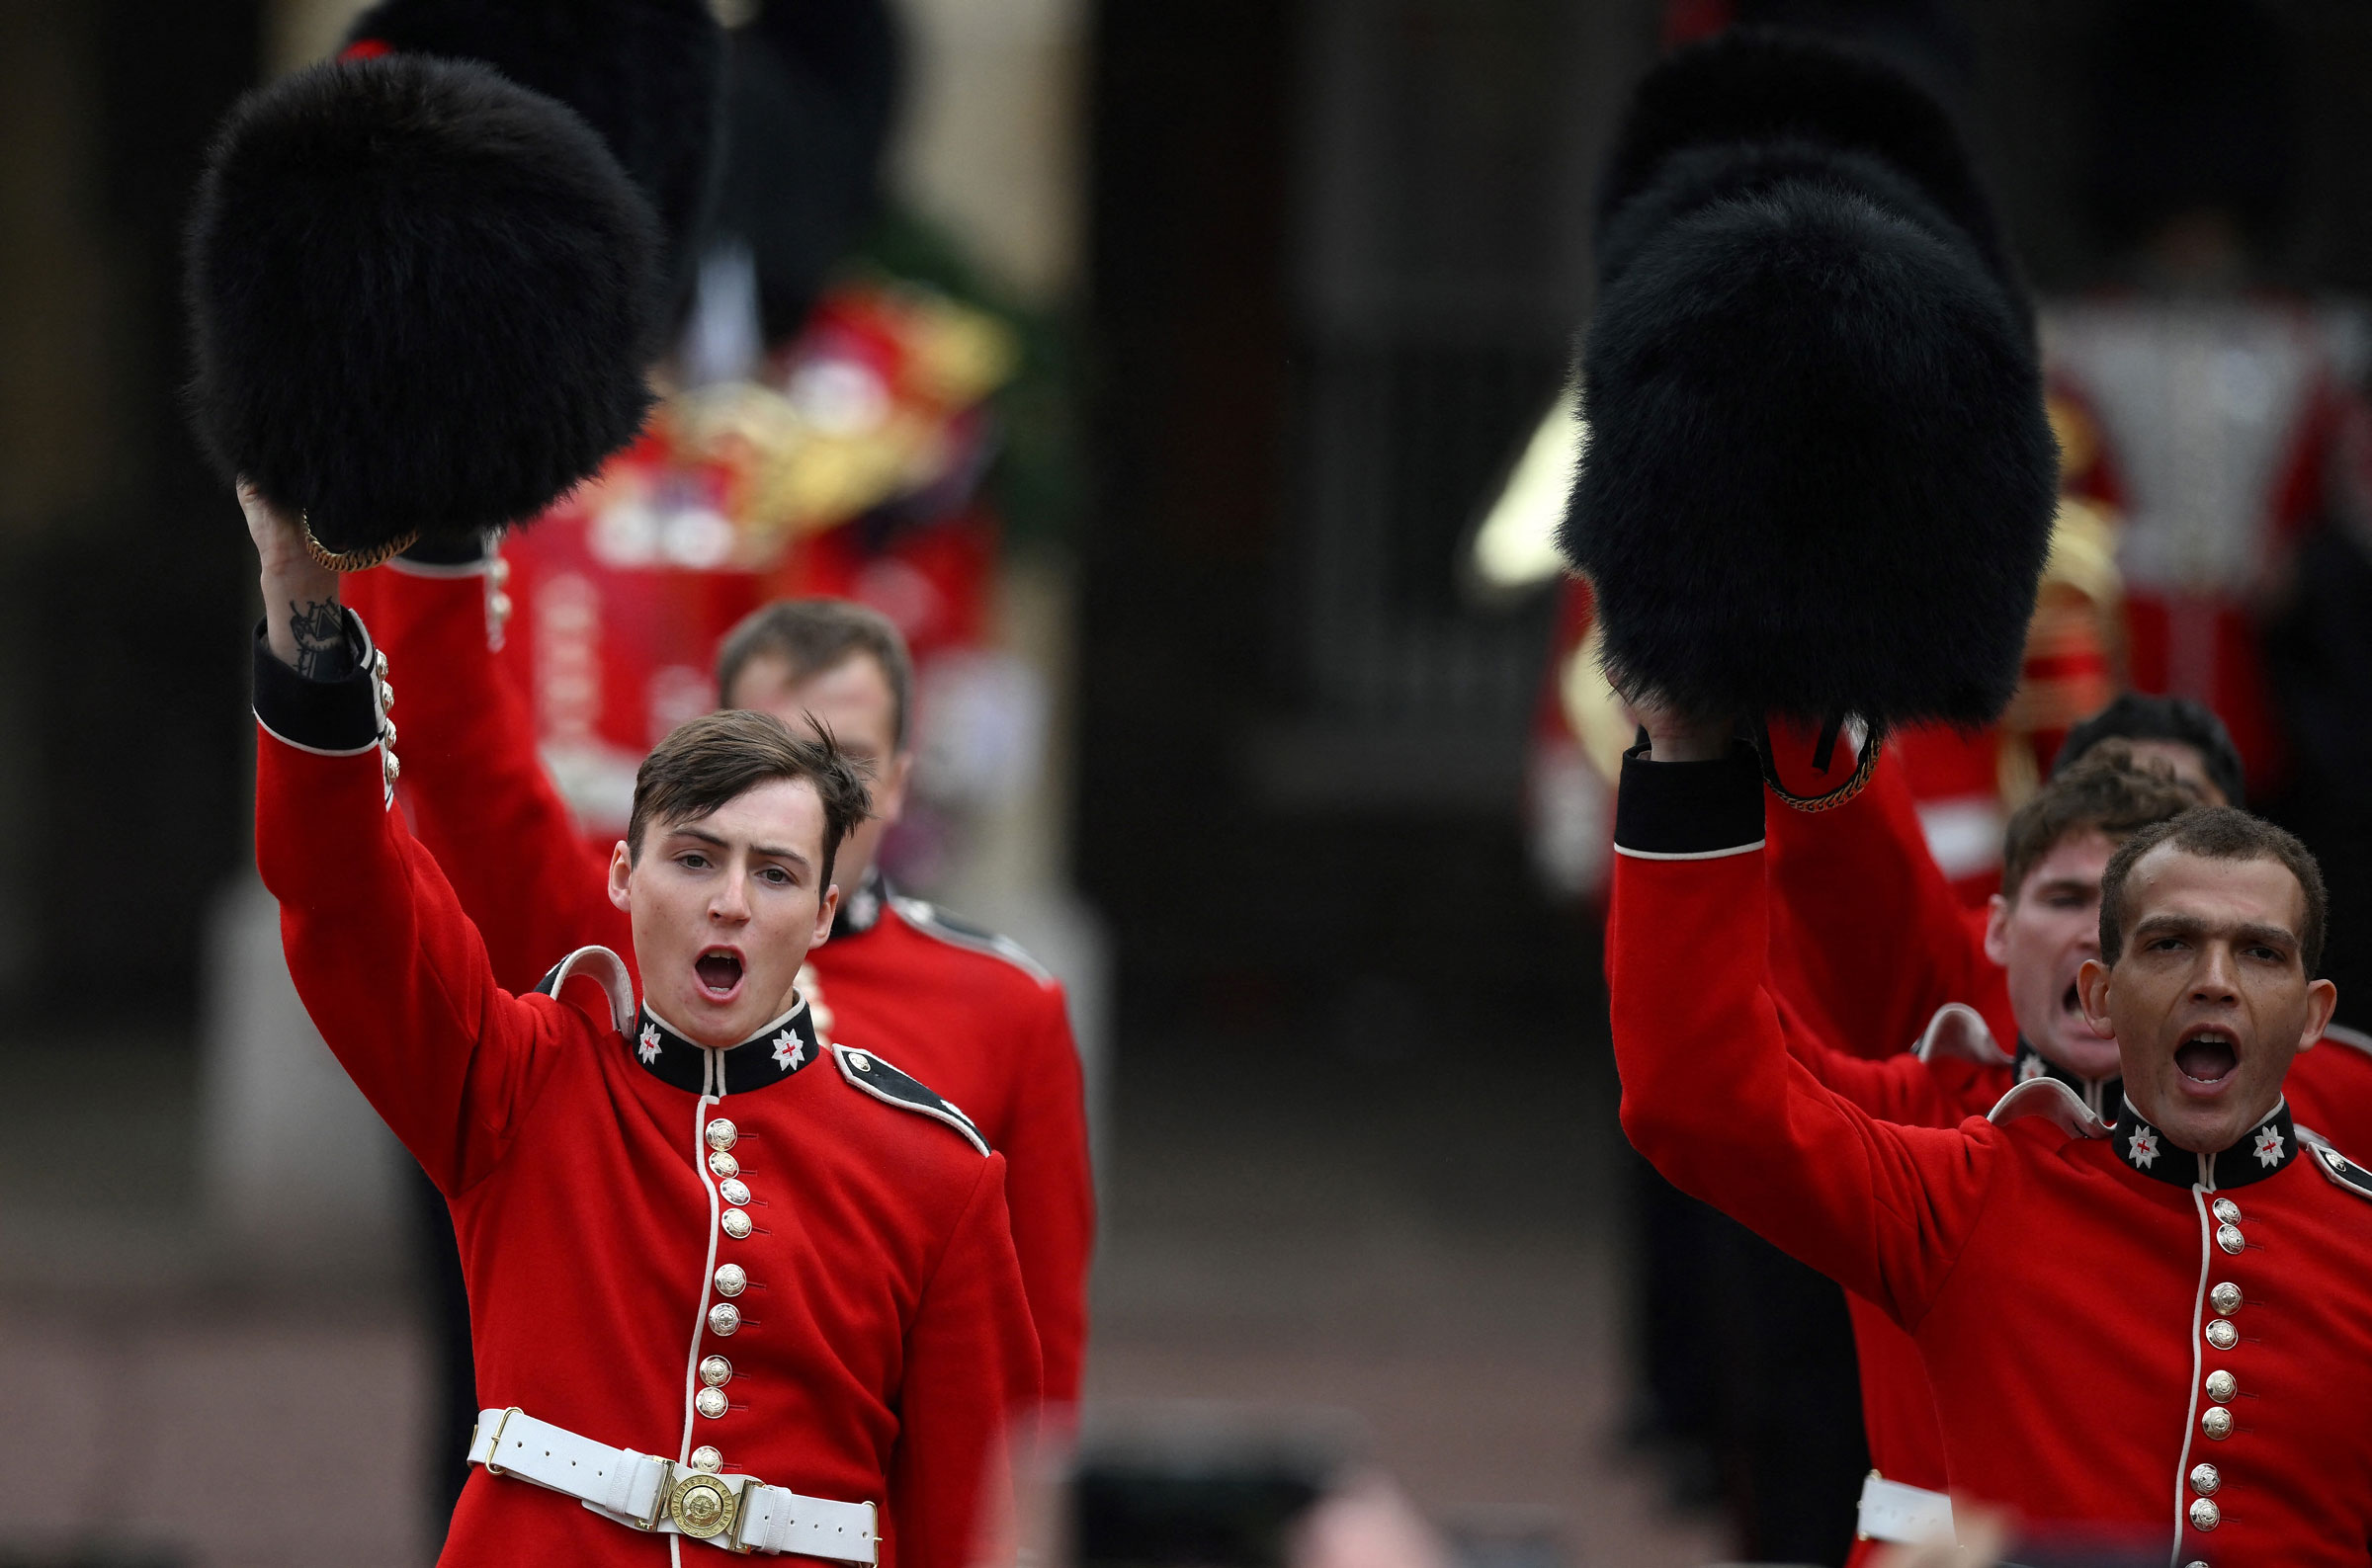 Members of the Coldstream Guards raise their hats as they salute the new King following his proclamation at St. James's Palace.